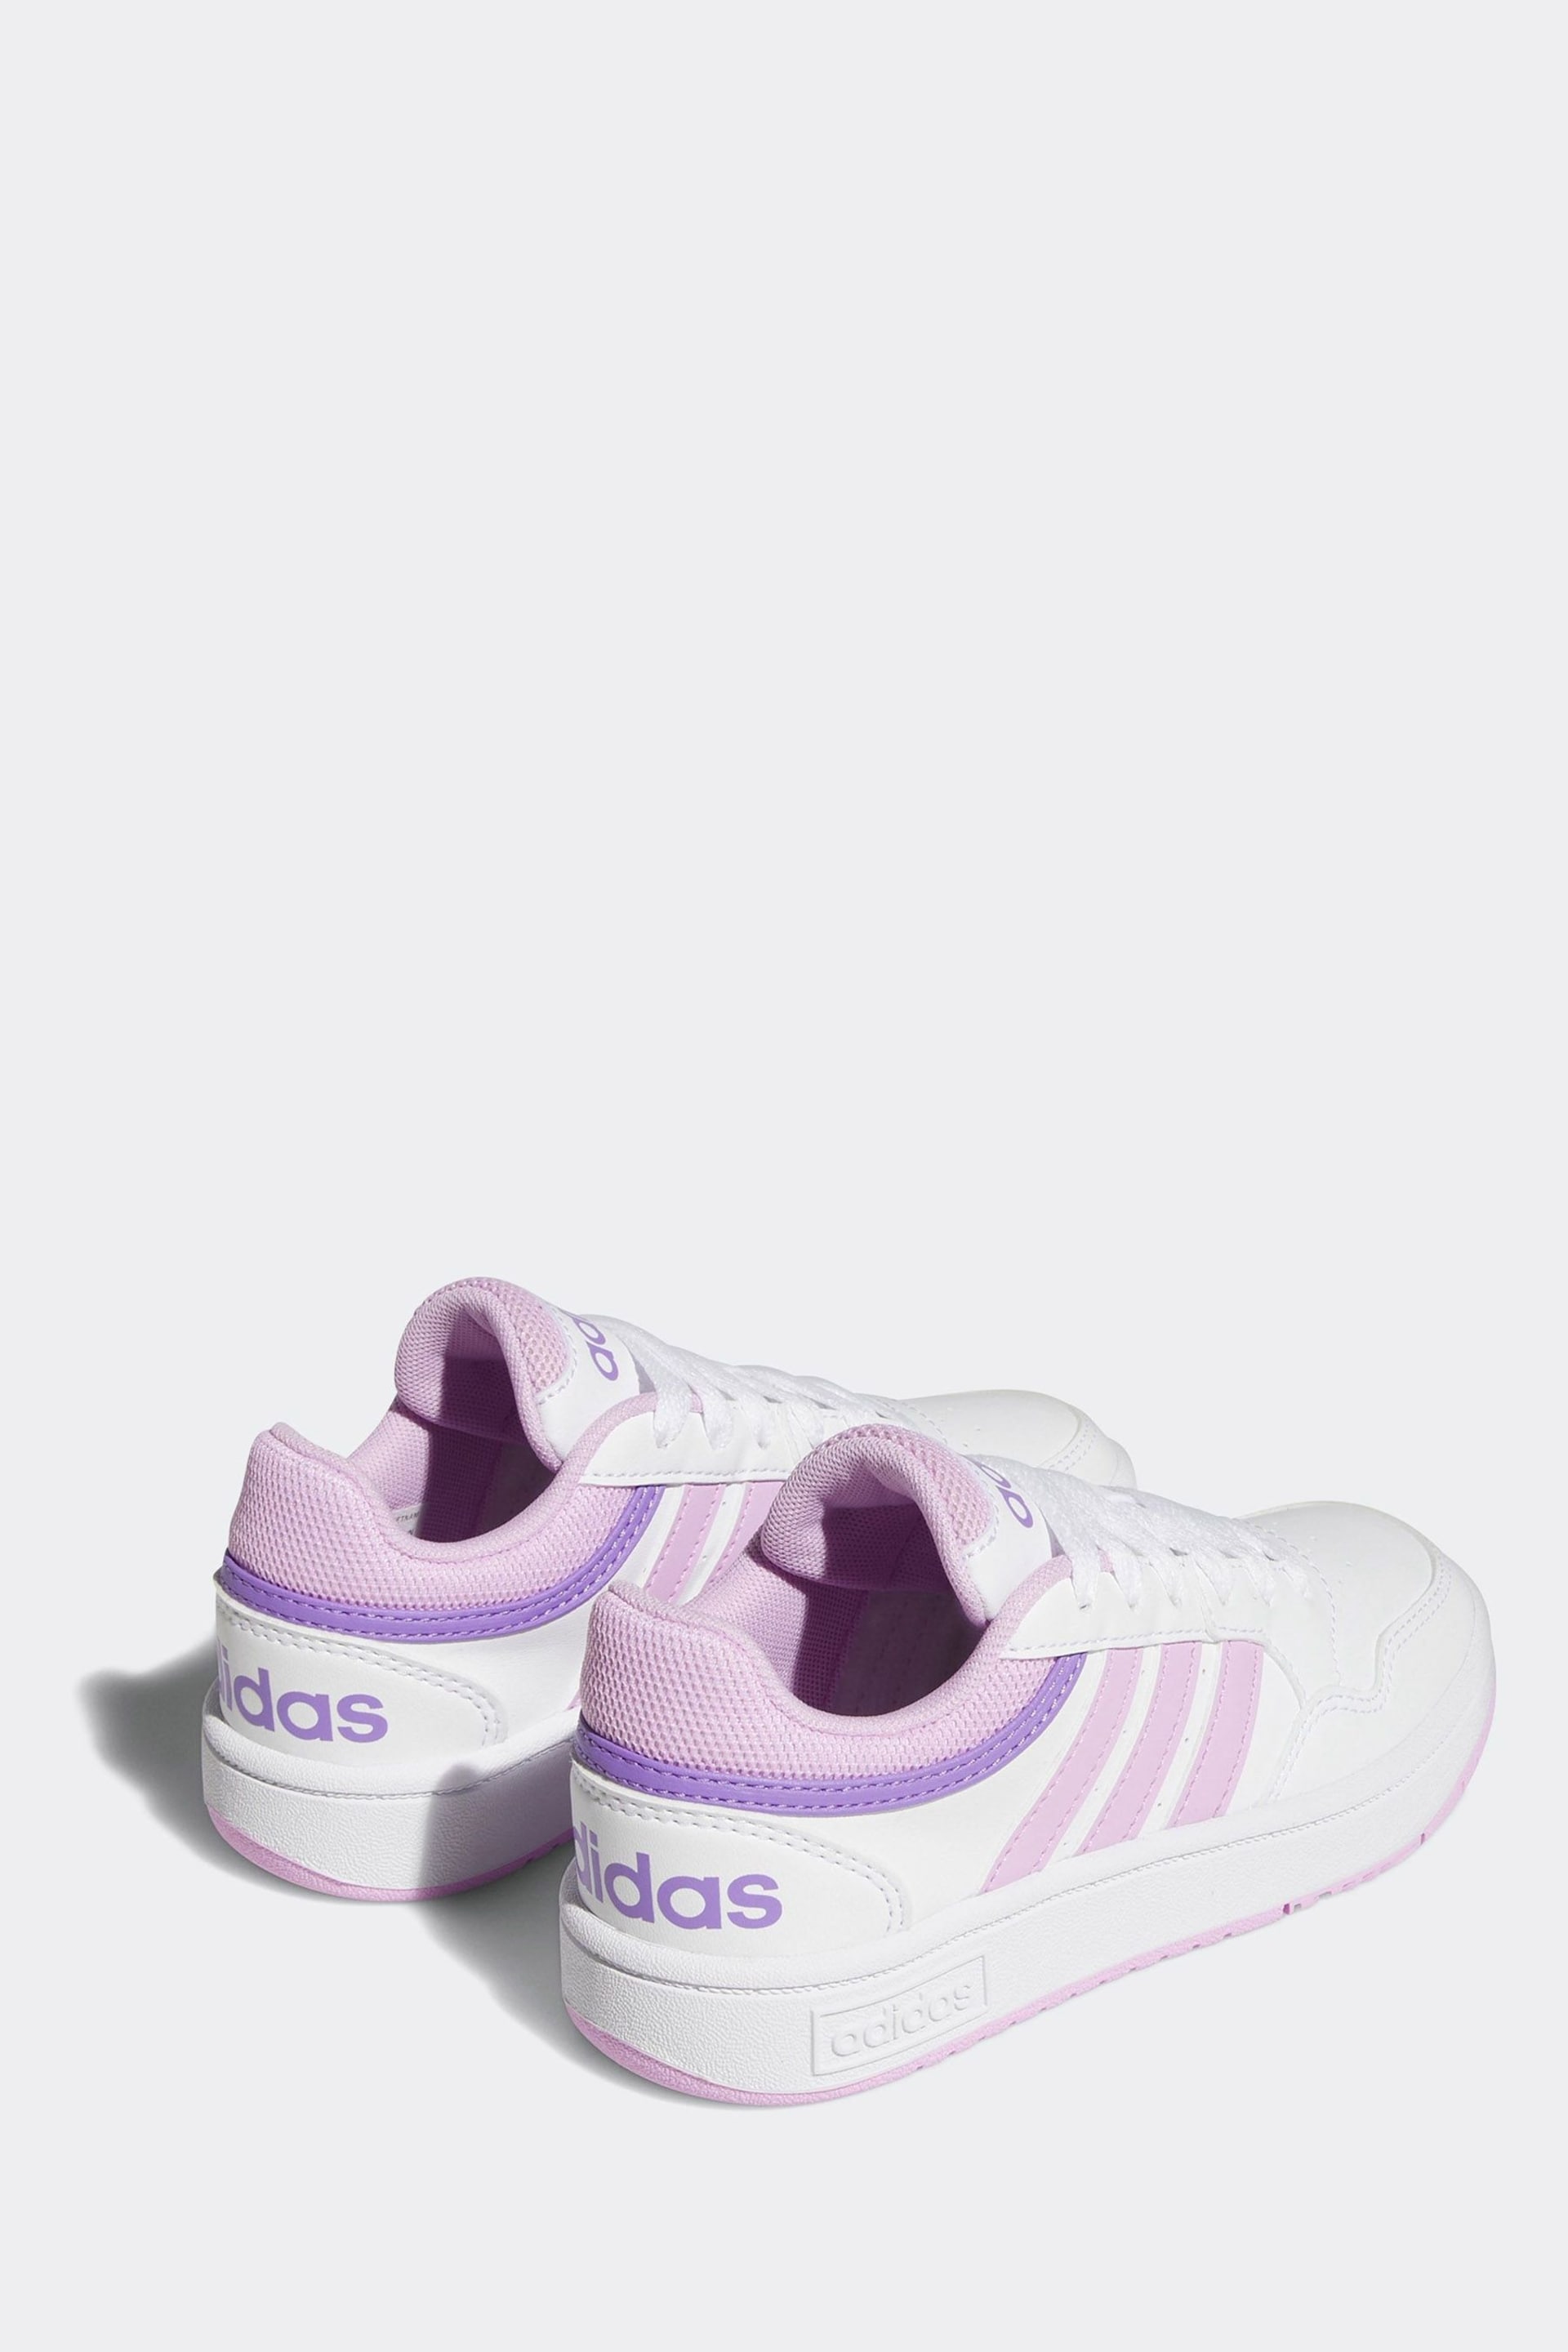 adidas White/purple Hoops Trainers - Image 3 of 9